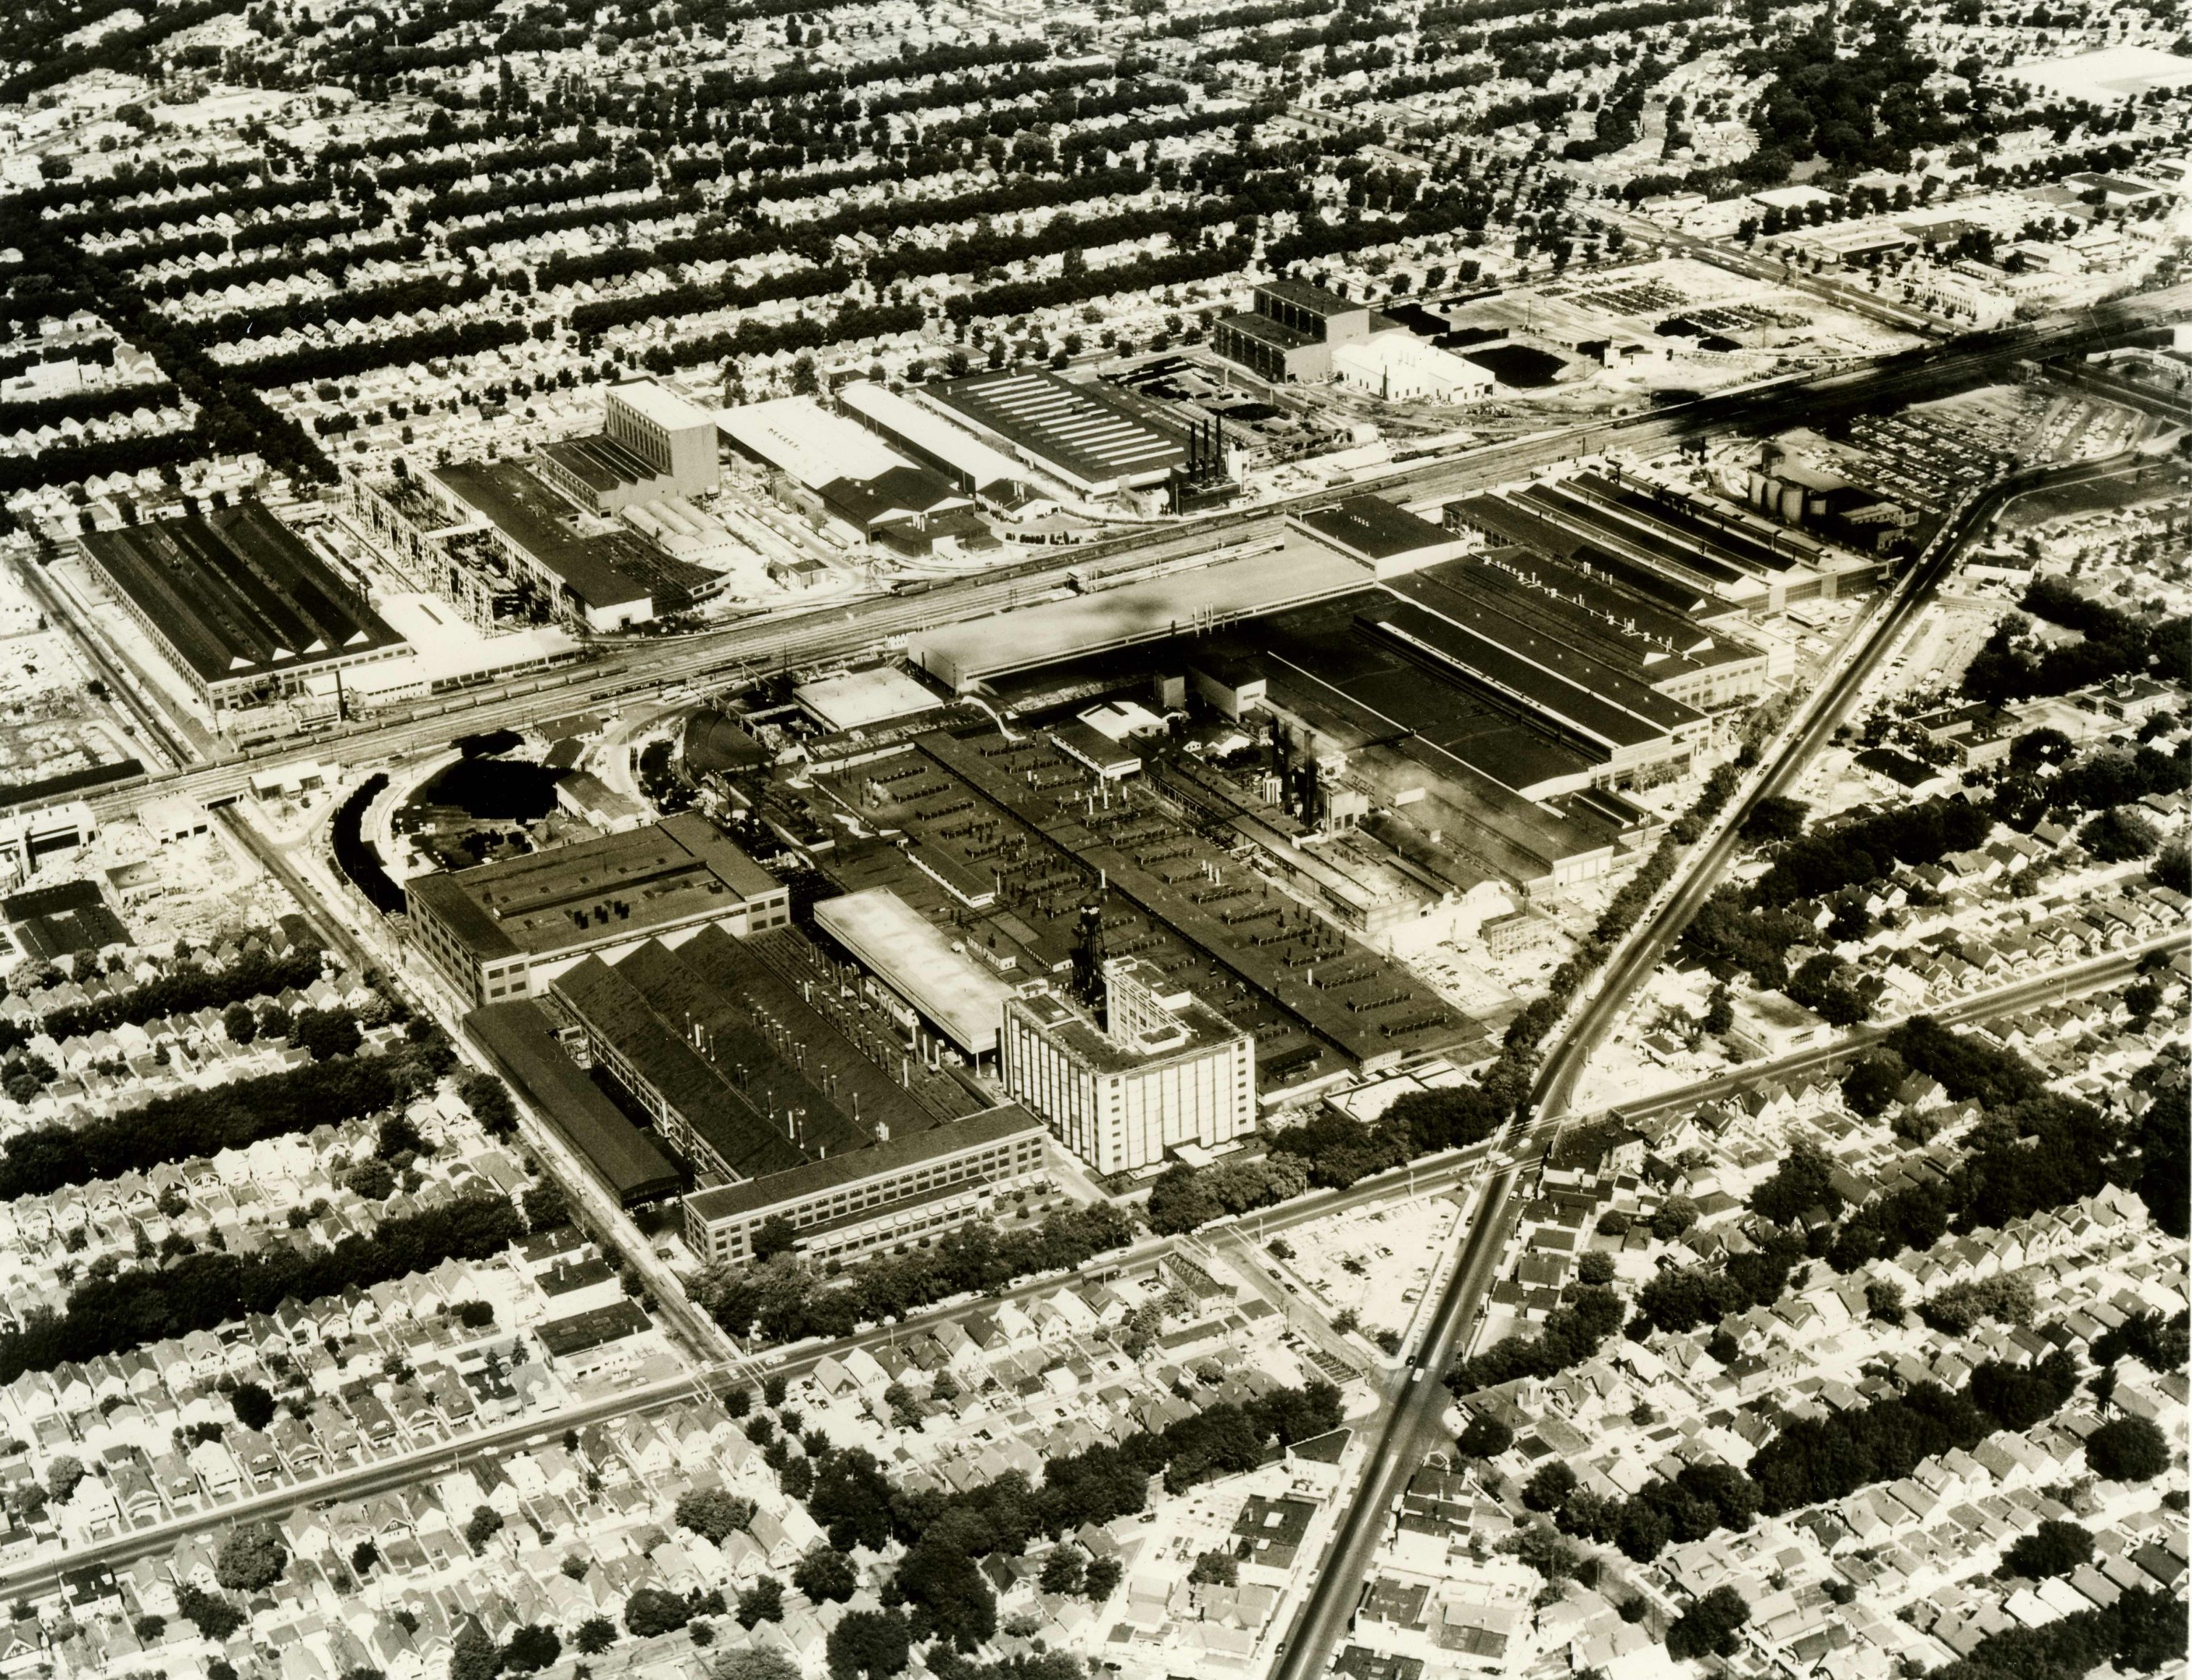 This aerial photograph of Franklin Heights taken in the 1960s shows the A. O. Smith Corporation site in the foreground, surrounded by residences.